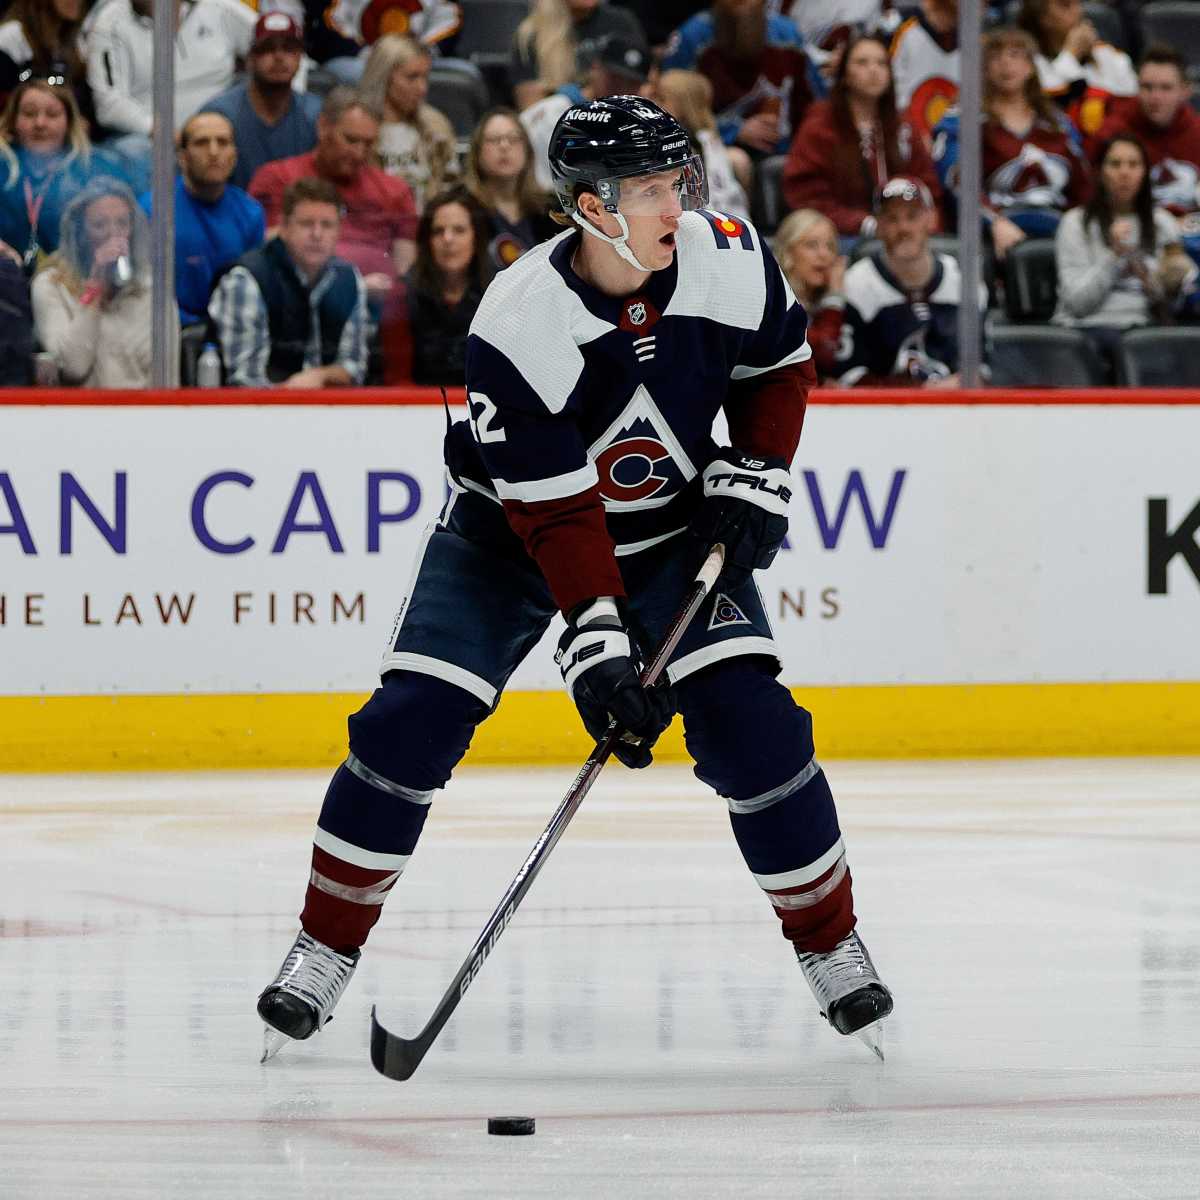 Avalanche defender looking to stay hot - The Hockey News Colorado Avalanche News, Analysis and More